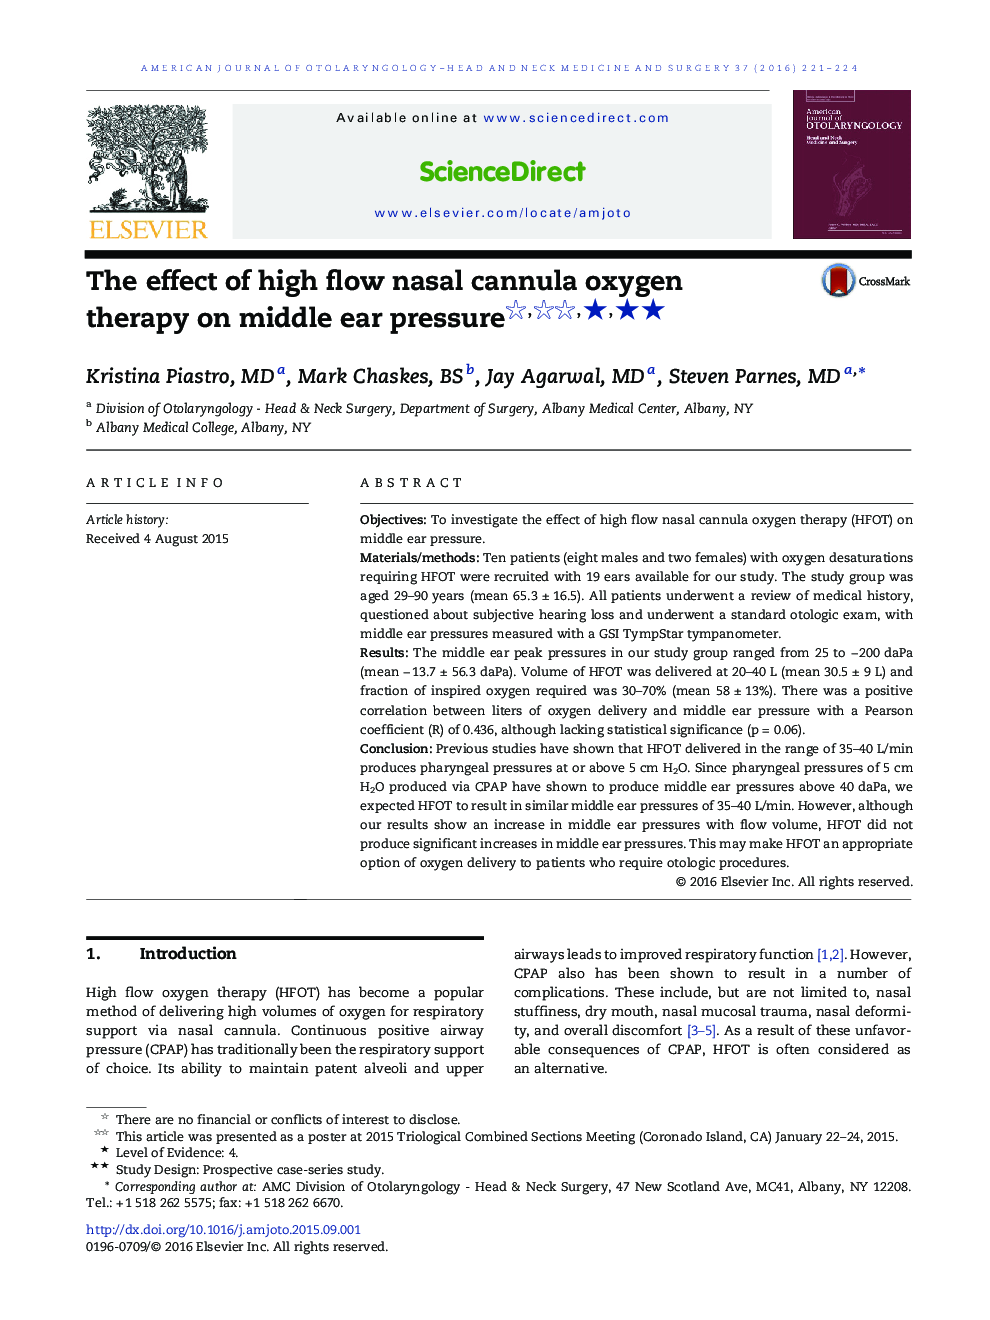 The effect of high flow nasal cannula oxygen therapy on middle ear pressure ★★★